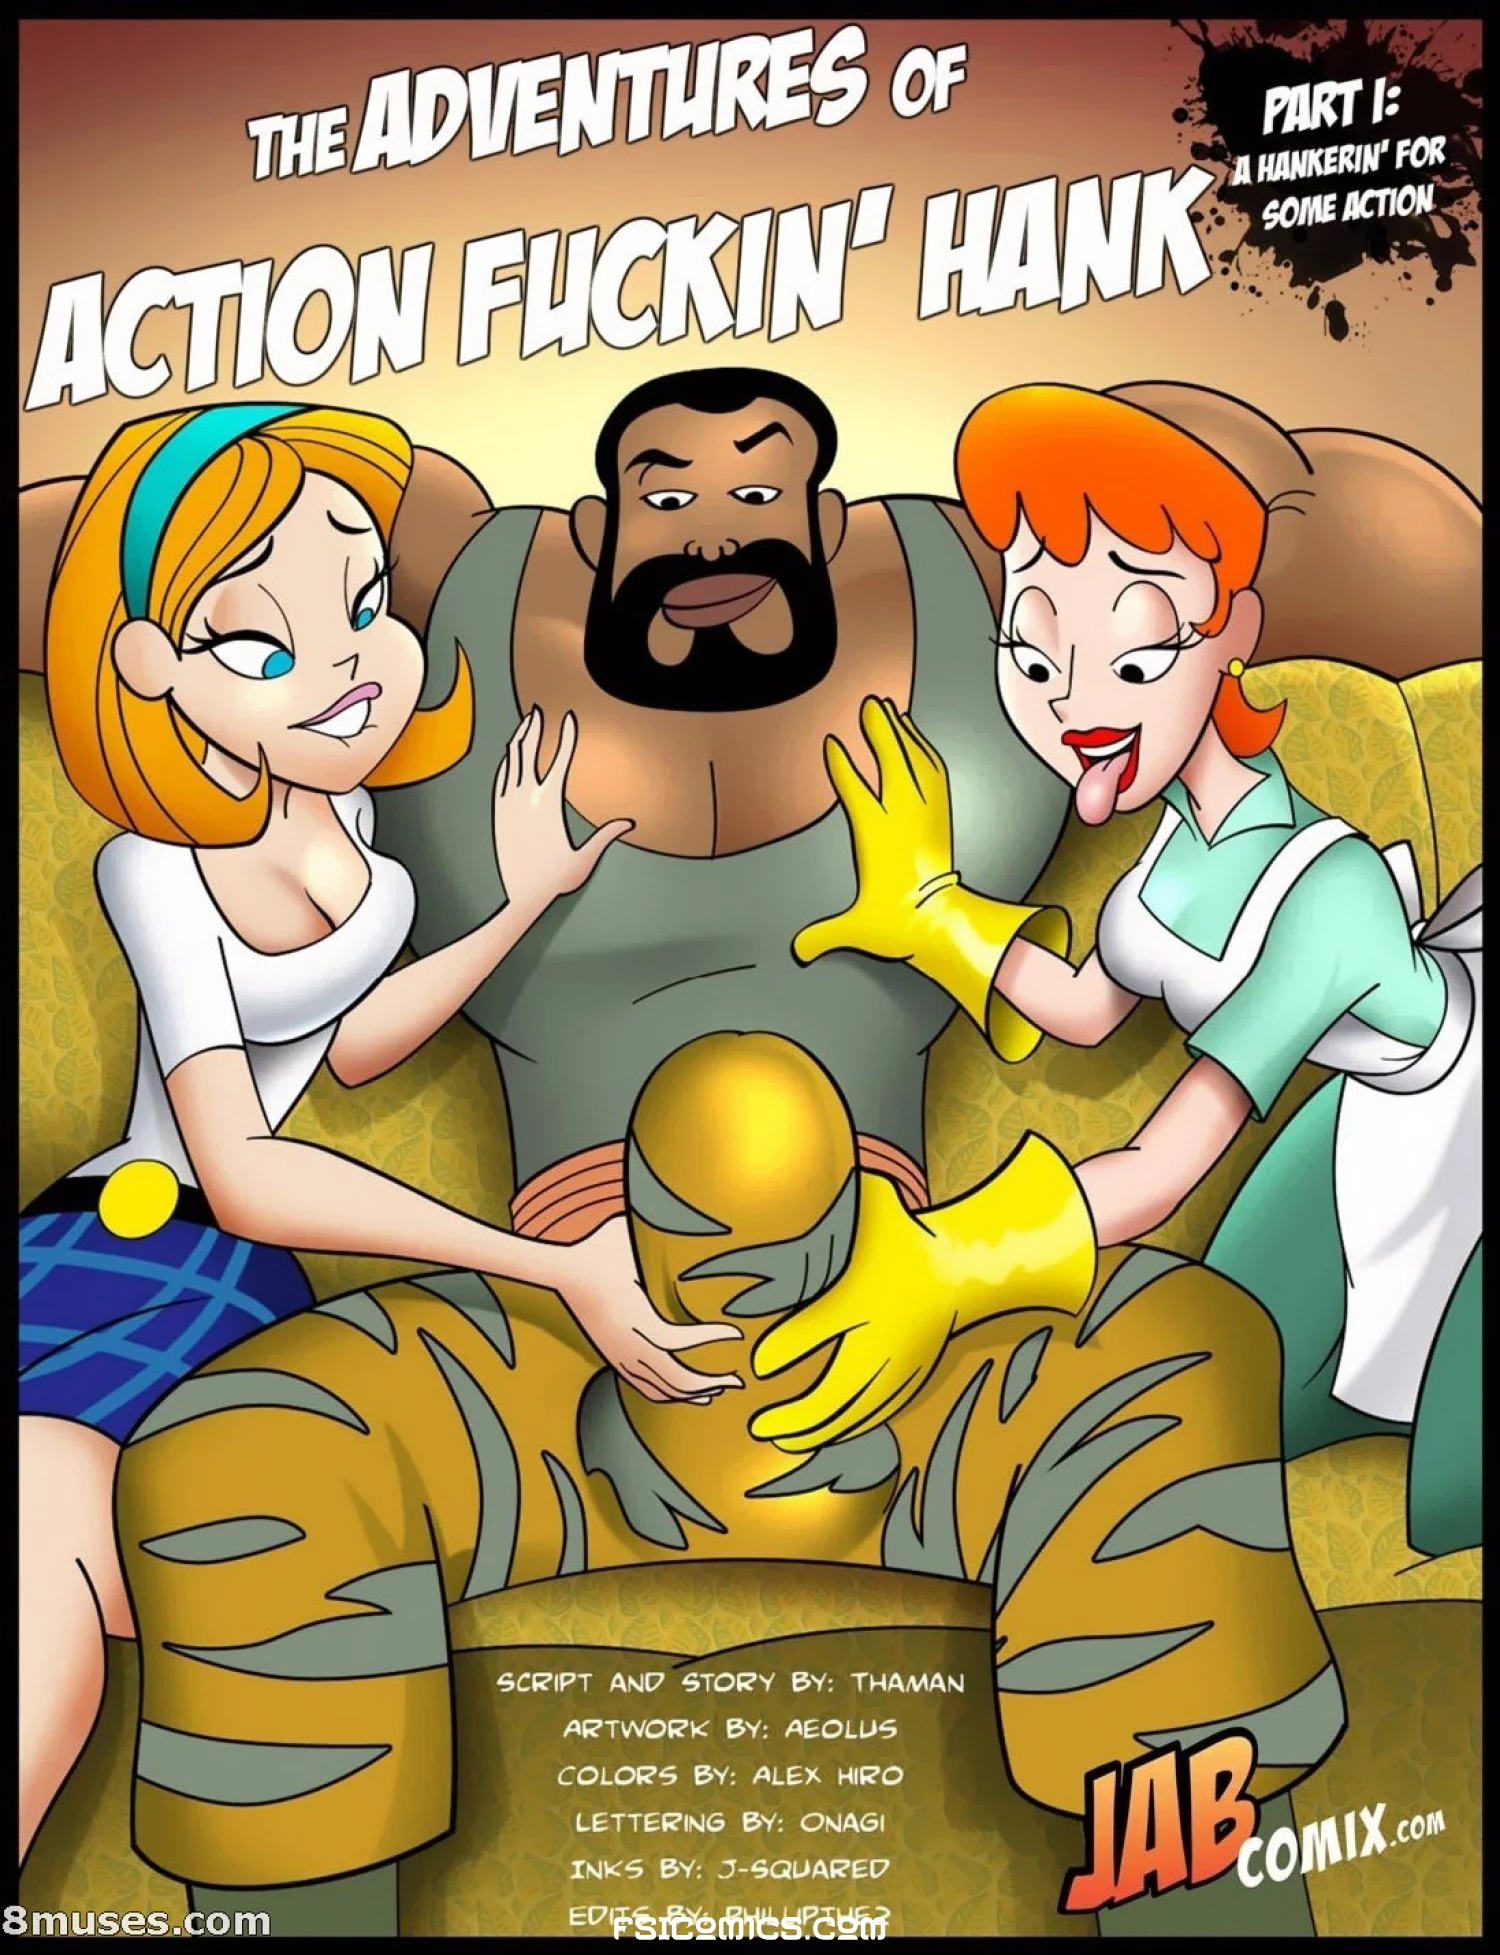 The Adventures Of Action Fuckin’ Hank Chapter 1 - A Hankerin' For Some Action – Jabcomix - 18 - Fsicomics